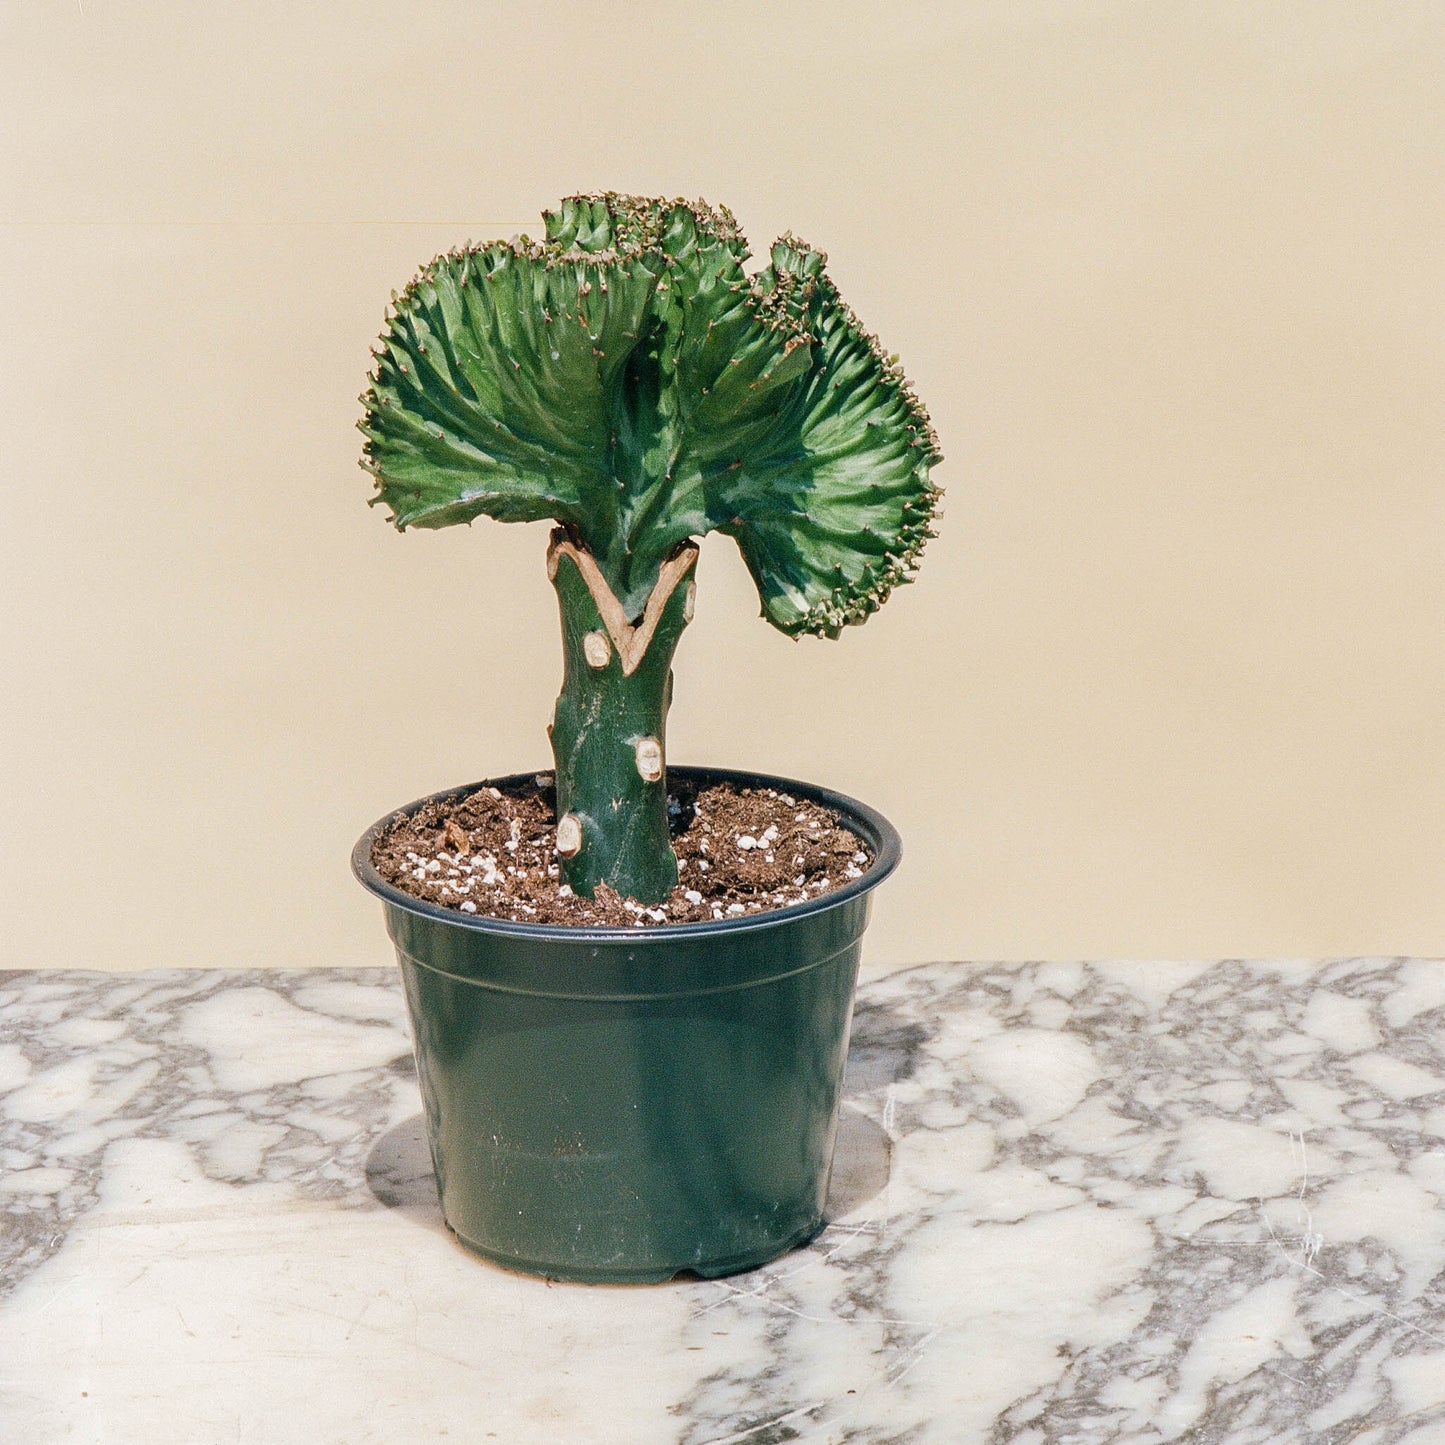 Green Coral Cactus (Euphorbia lactea) in a 6 inch pot. Indoor plant for sale by Promise Supply for delivery and pickup in Toronto